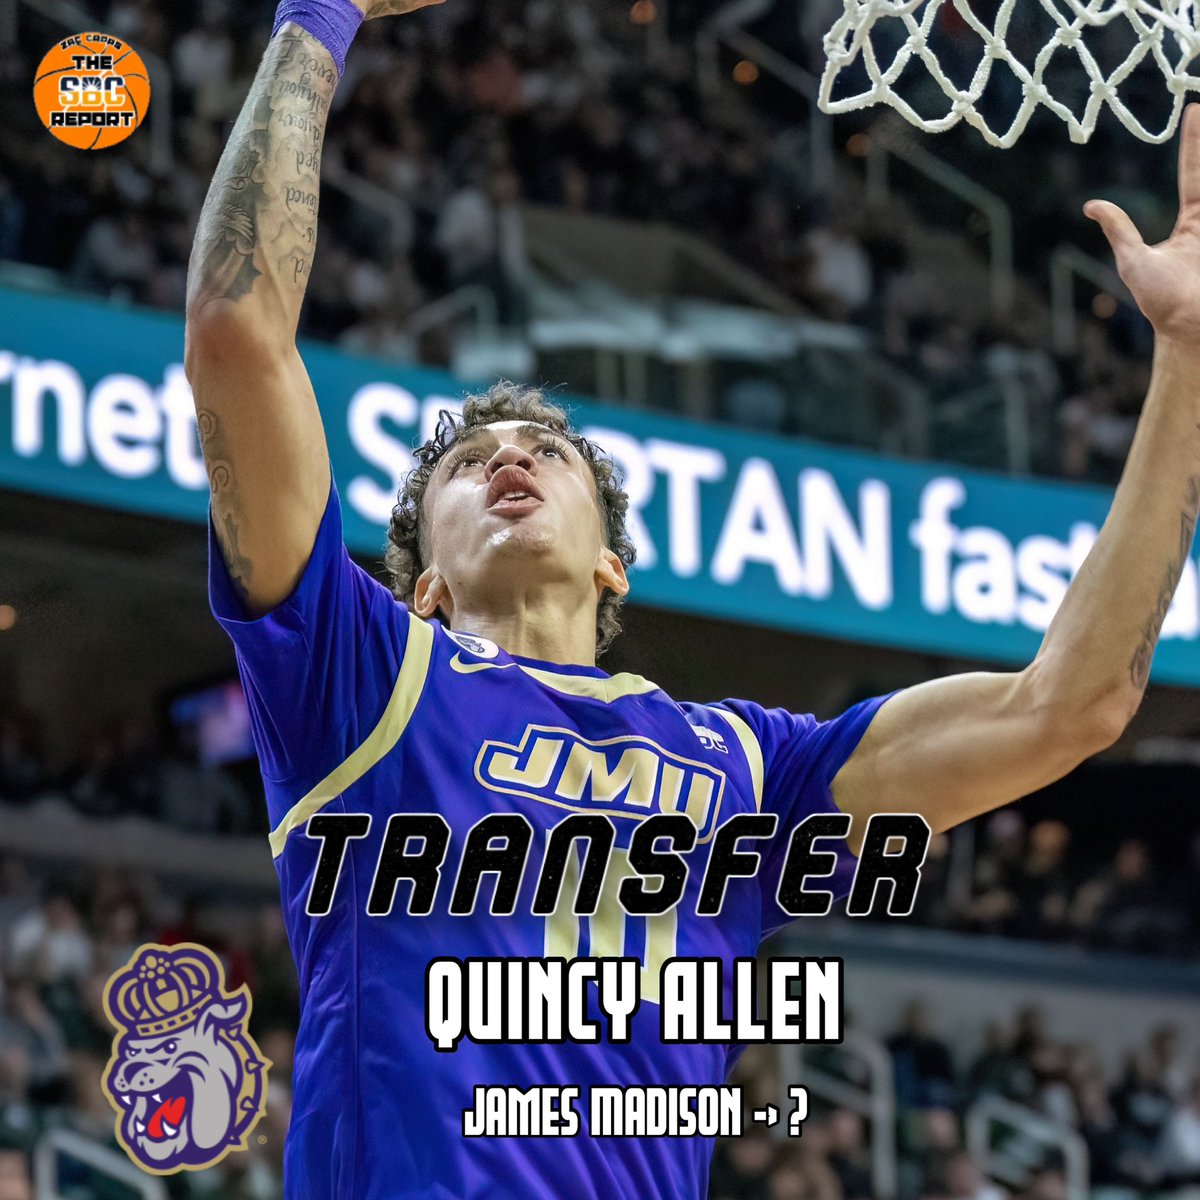 🚨James Madison wing Quincy Allen has entered the transfer portal

📊The 6’8” sophomore averaged 3.8 PPG in only 8 games this past season. Former 4 ⭐️ recruit

#JamesMadison #CollegeBasketball #SunBeltMBB